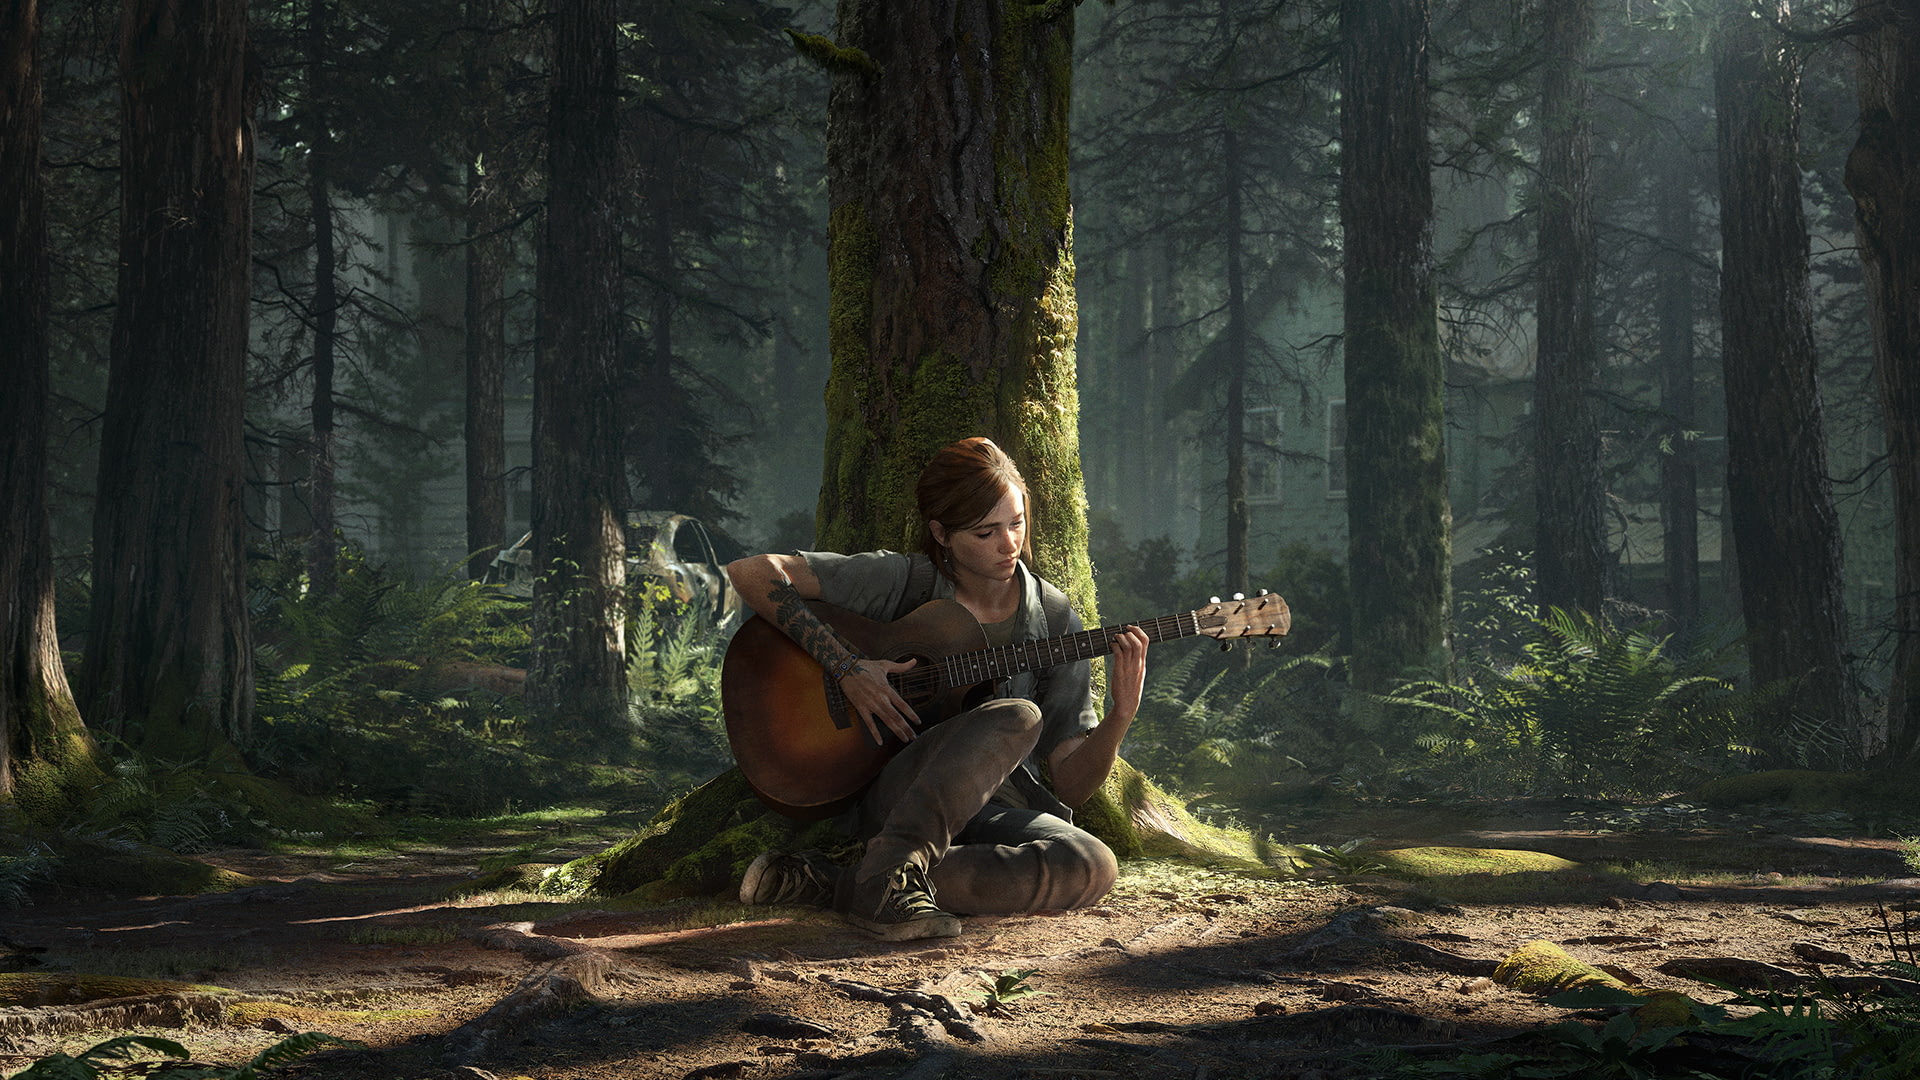 Multiplayer The Last of Us is still in development, says director